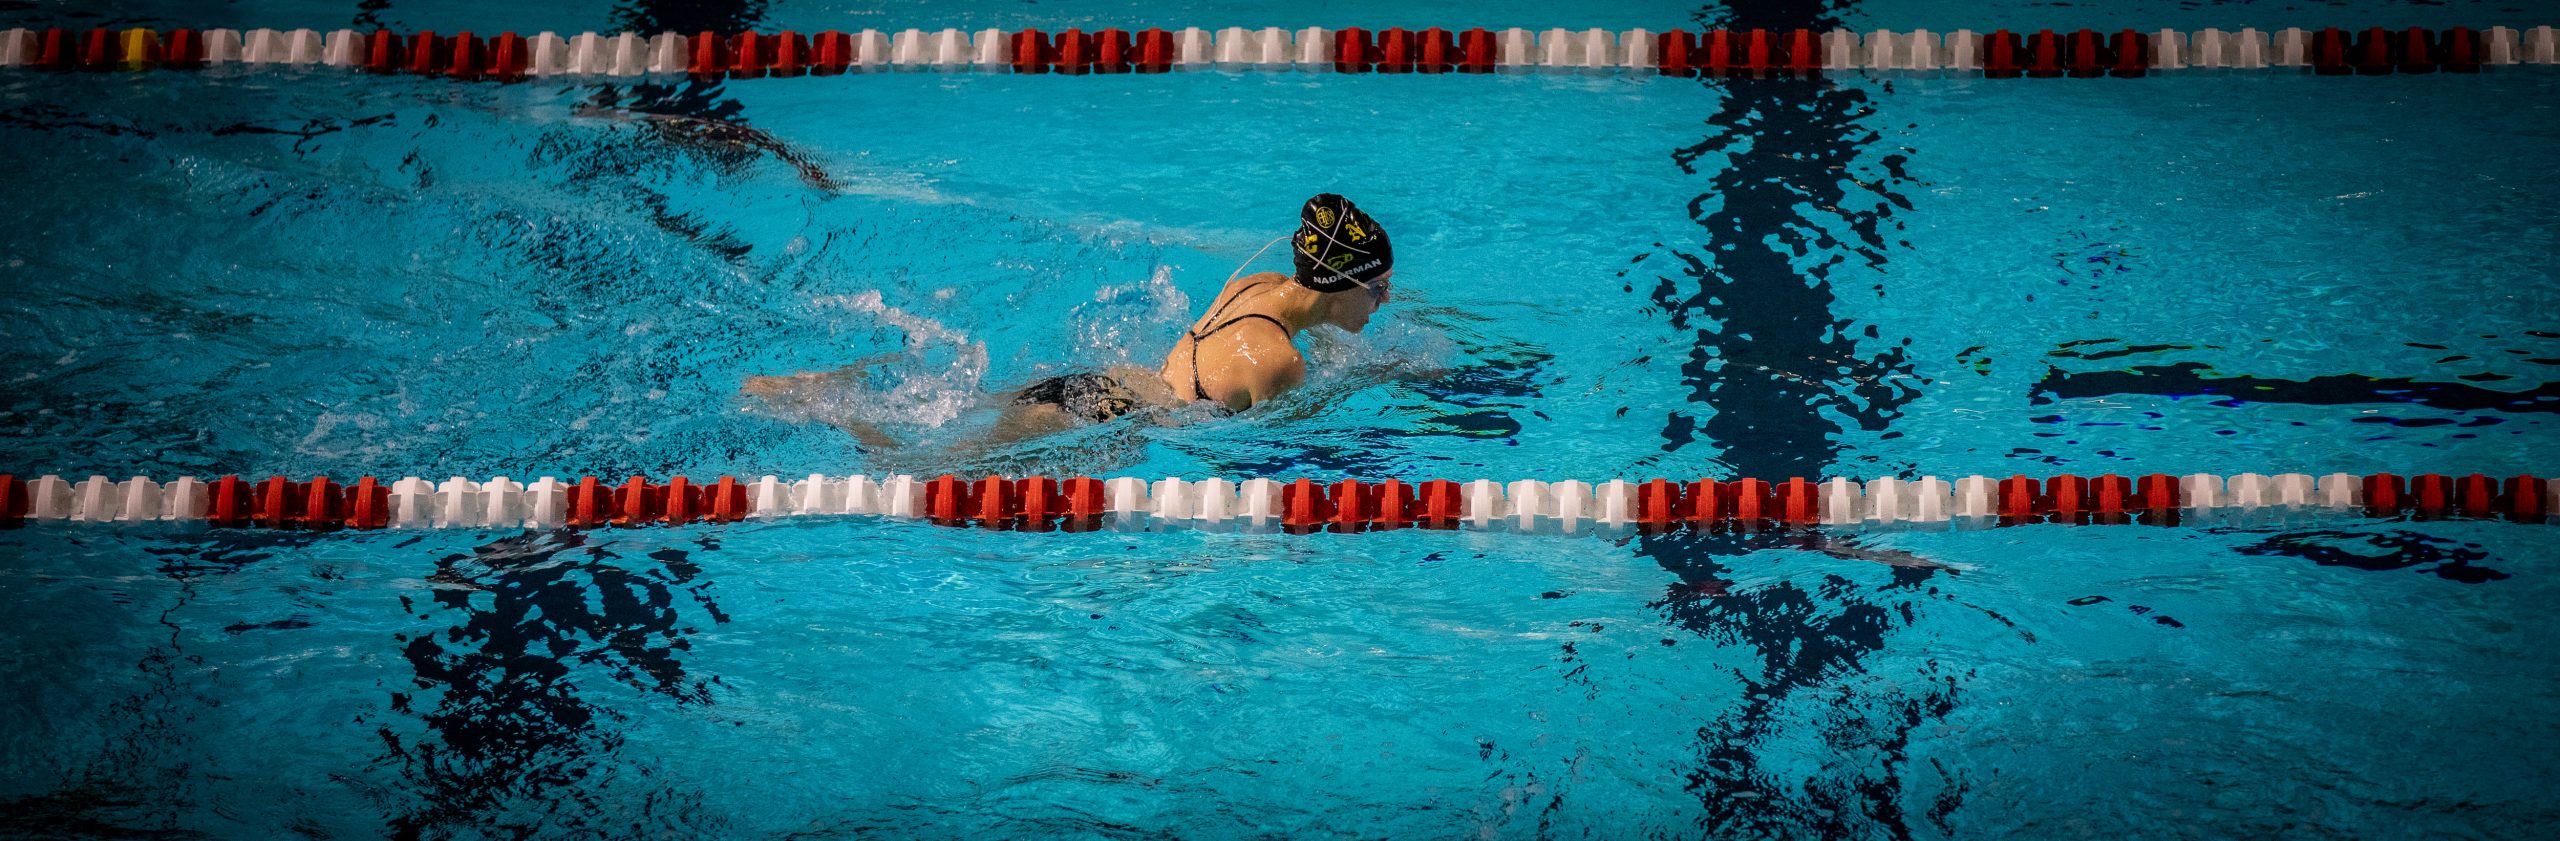 Fish Out of Water: Swim Teams Find Ways to Hone Skills